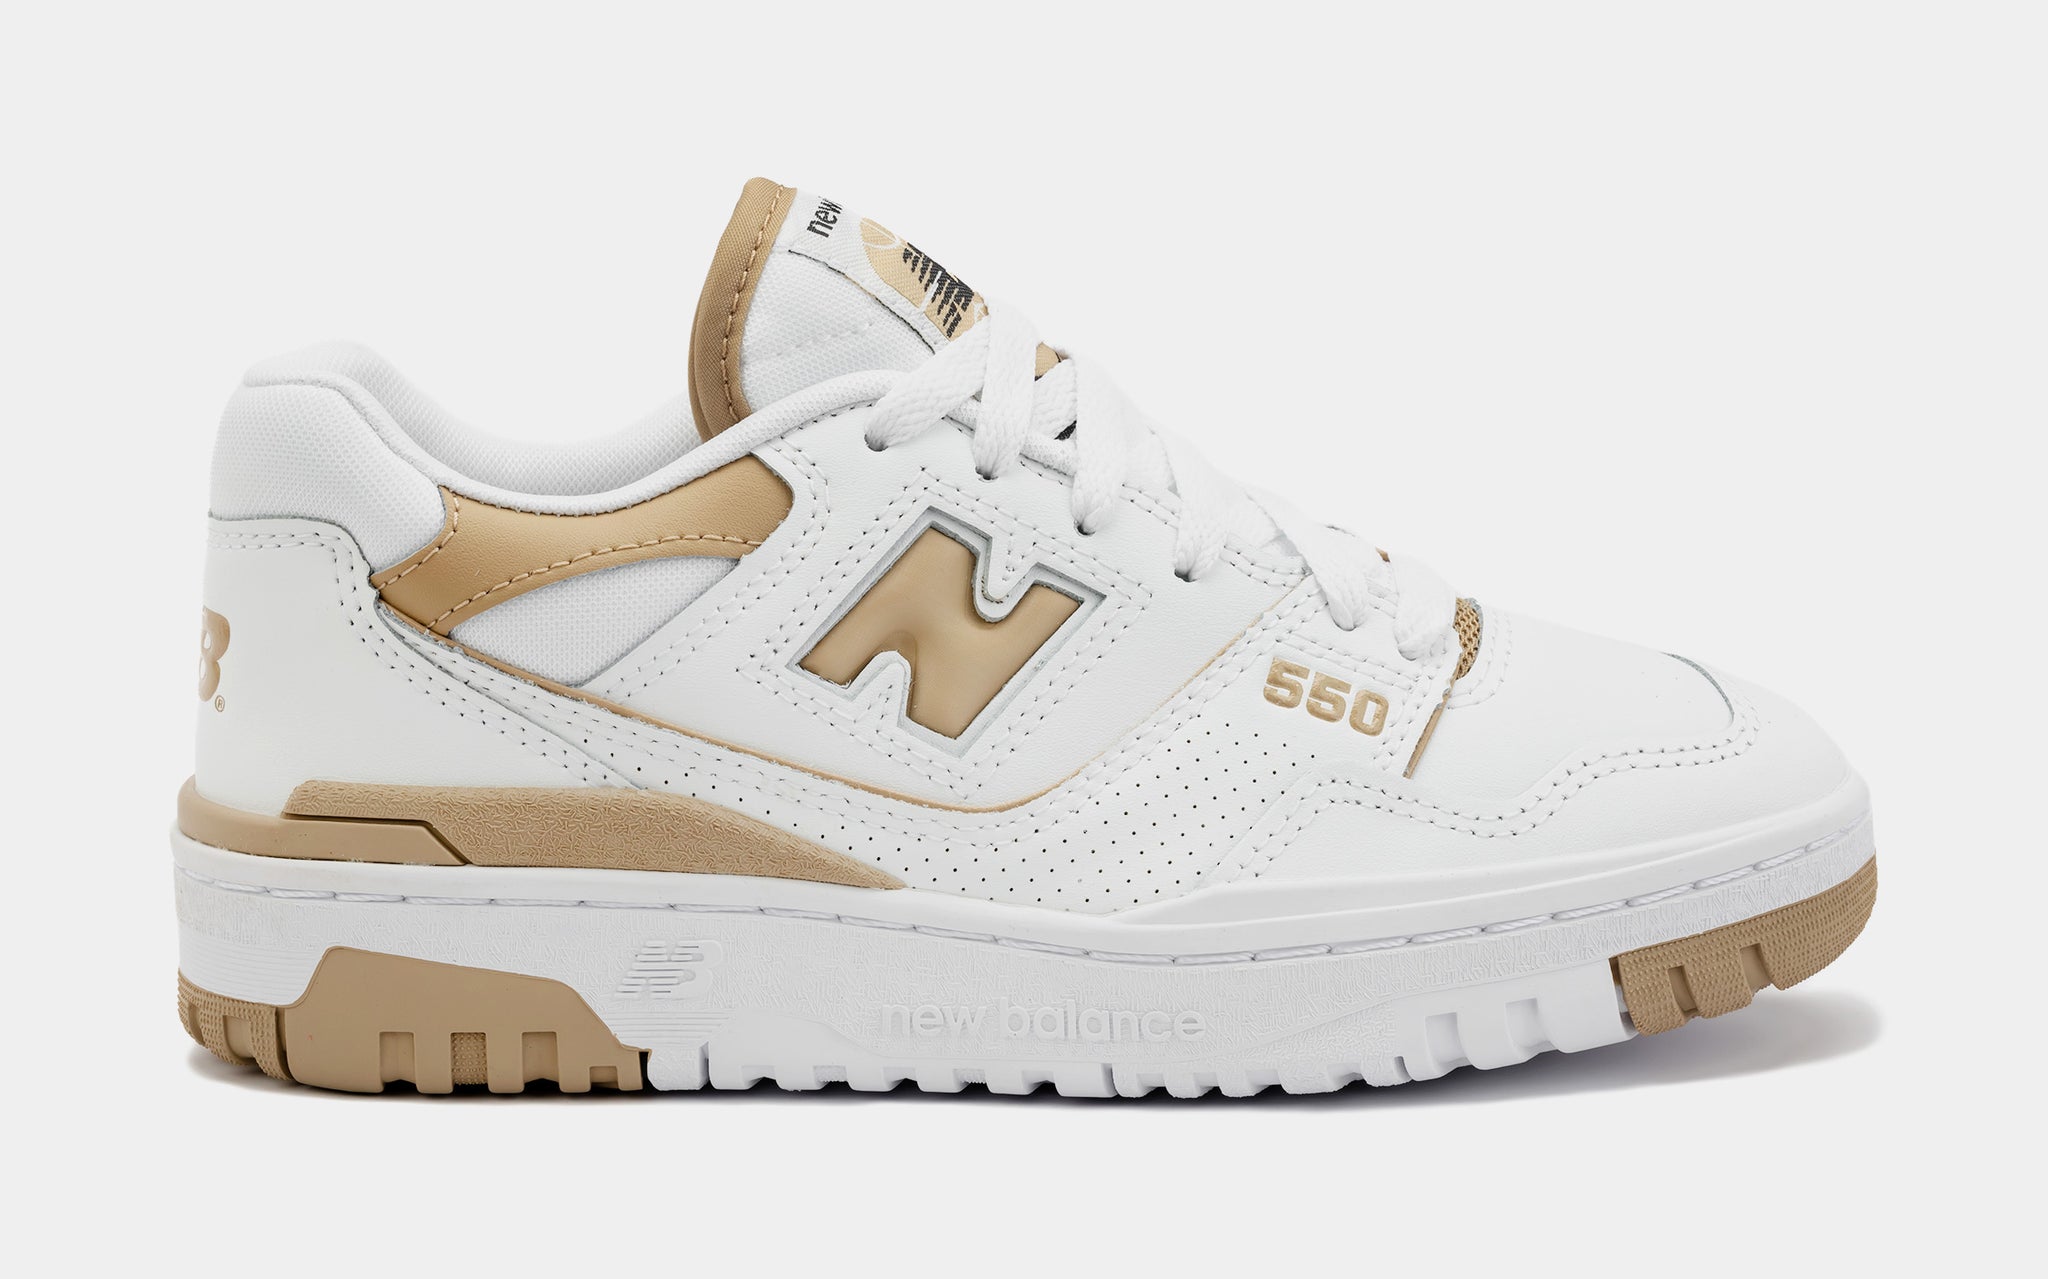 New Balance 550 Gold Sand Womens Lifestyle Shoes Beige White